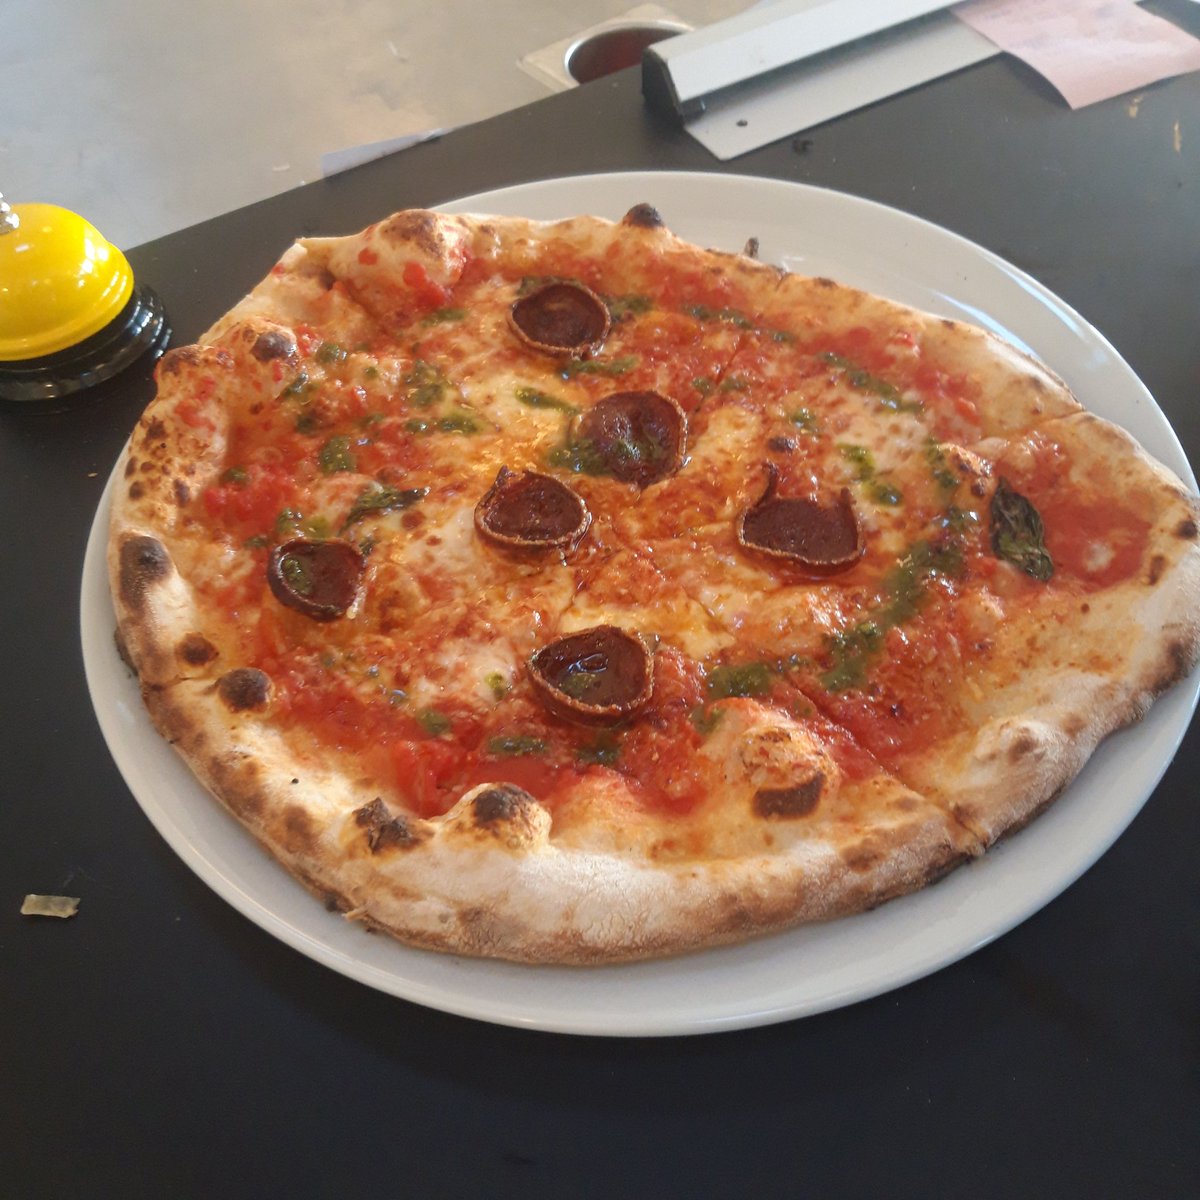 RIND - the new cheese-heavy pizza restaurant in our brand new extension was looking amazing yesterday! What a day for it!